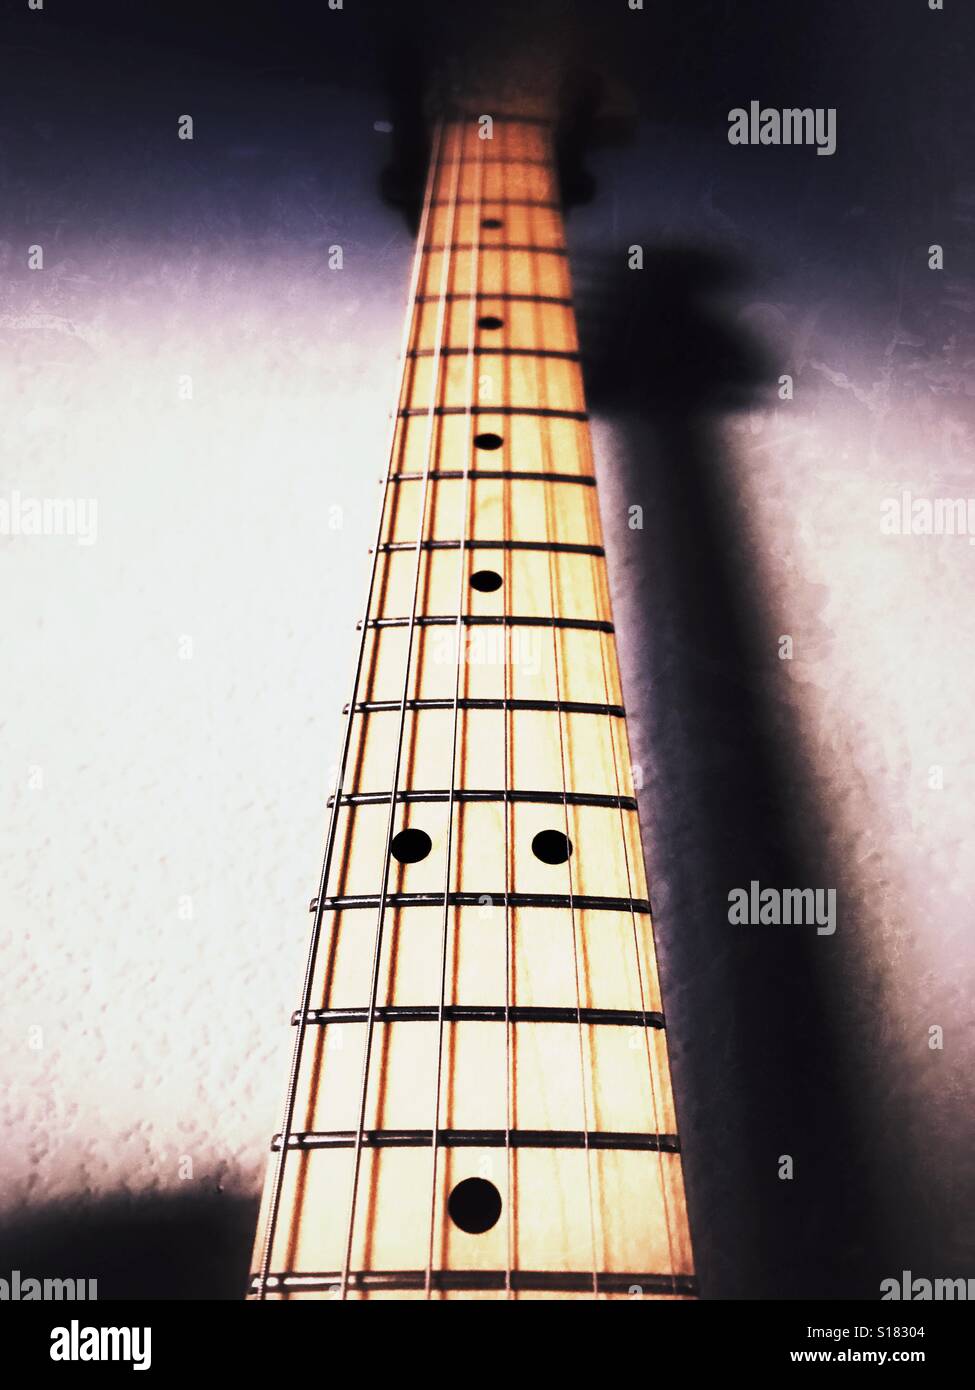 Perspective view of a guitar neck Stock Photo